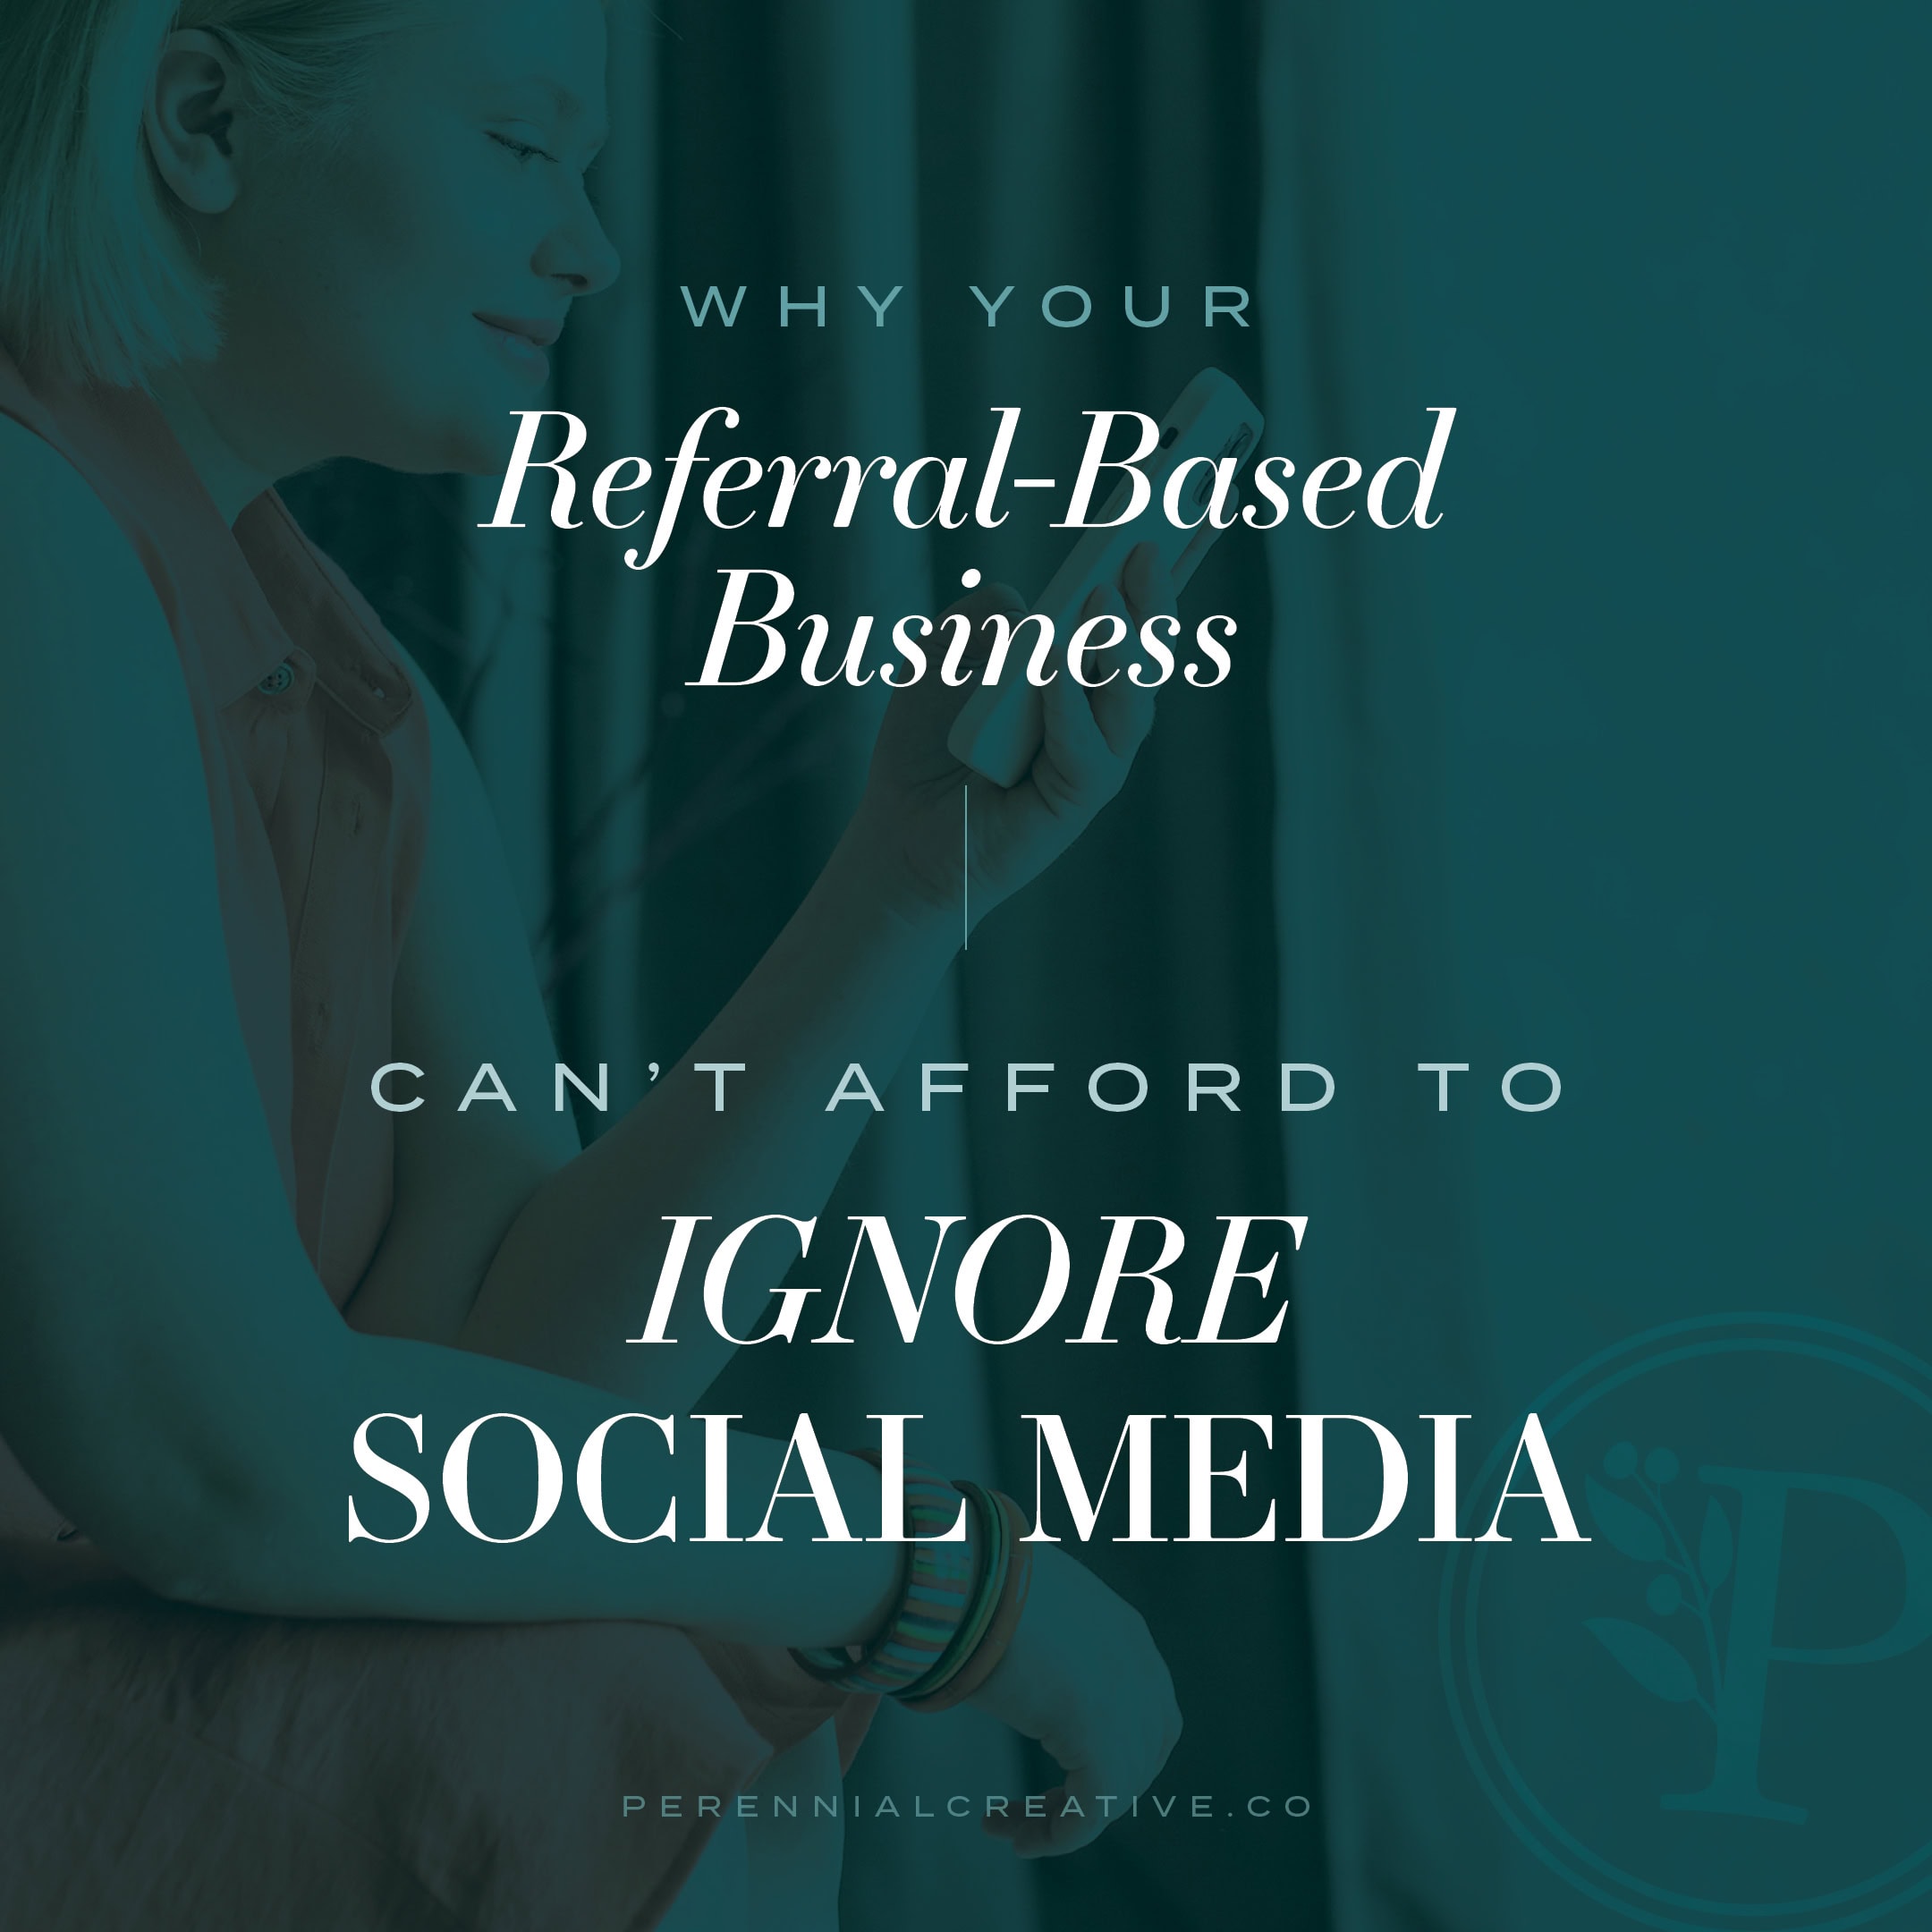 Why Your Referral-Based Business Can’t Afford to Ignore Social Media SQ